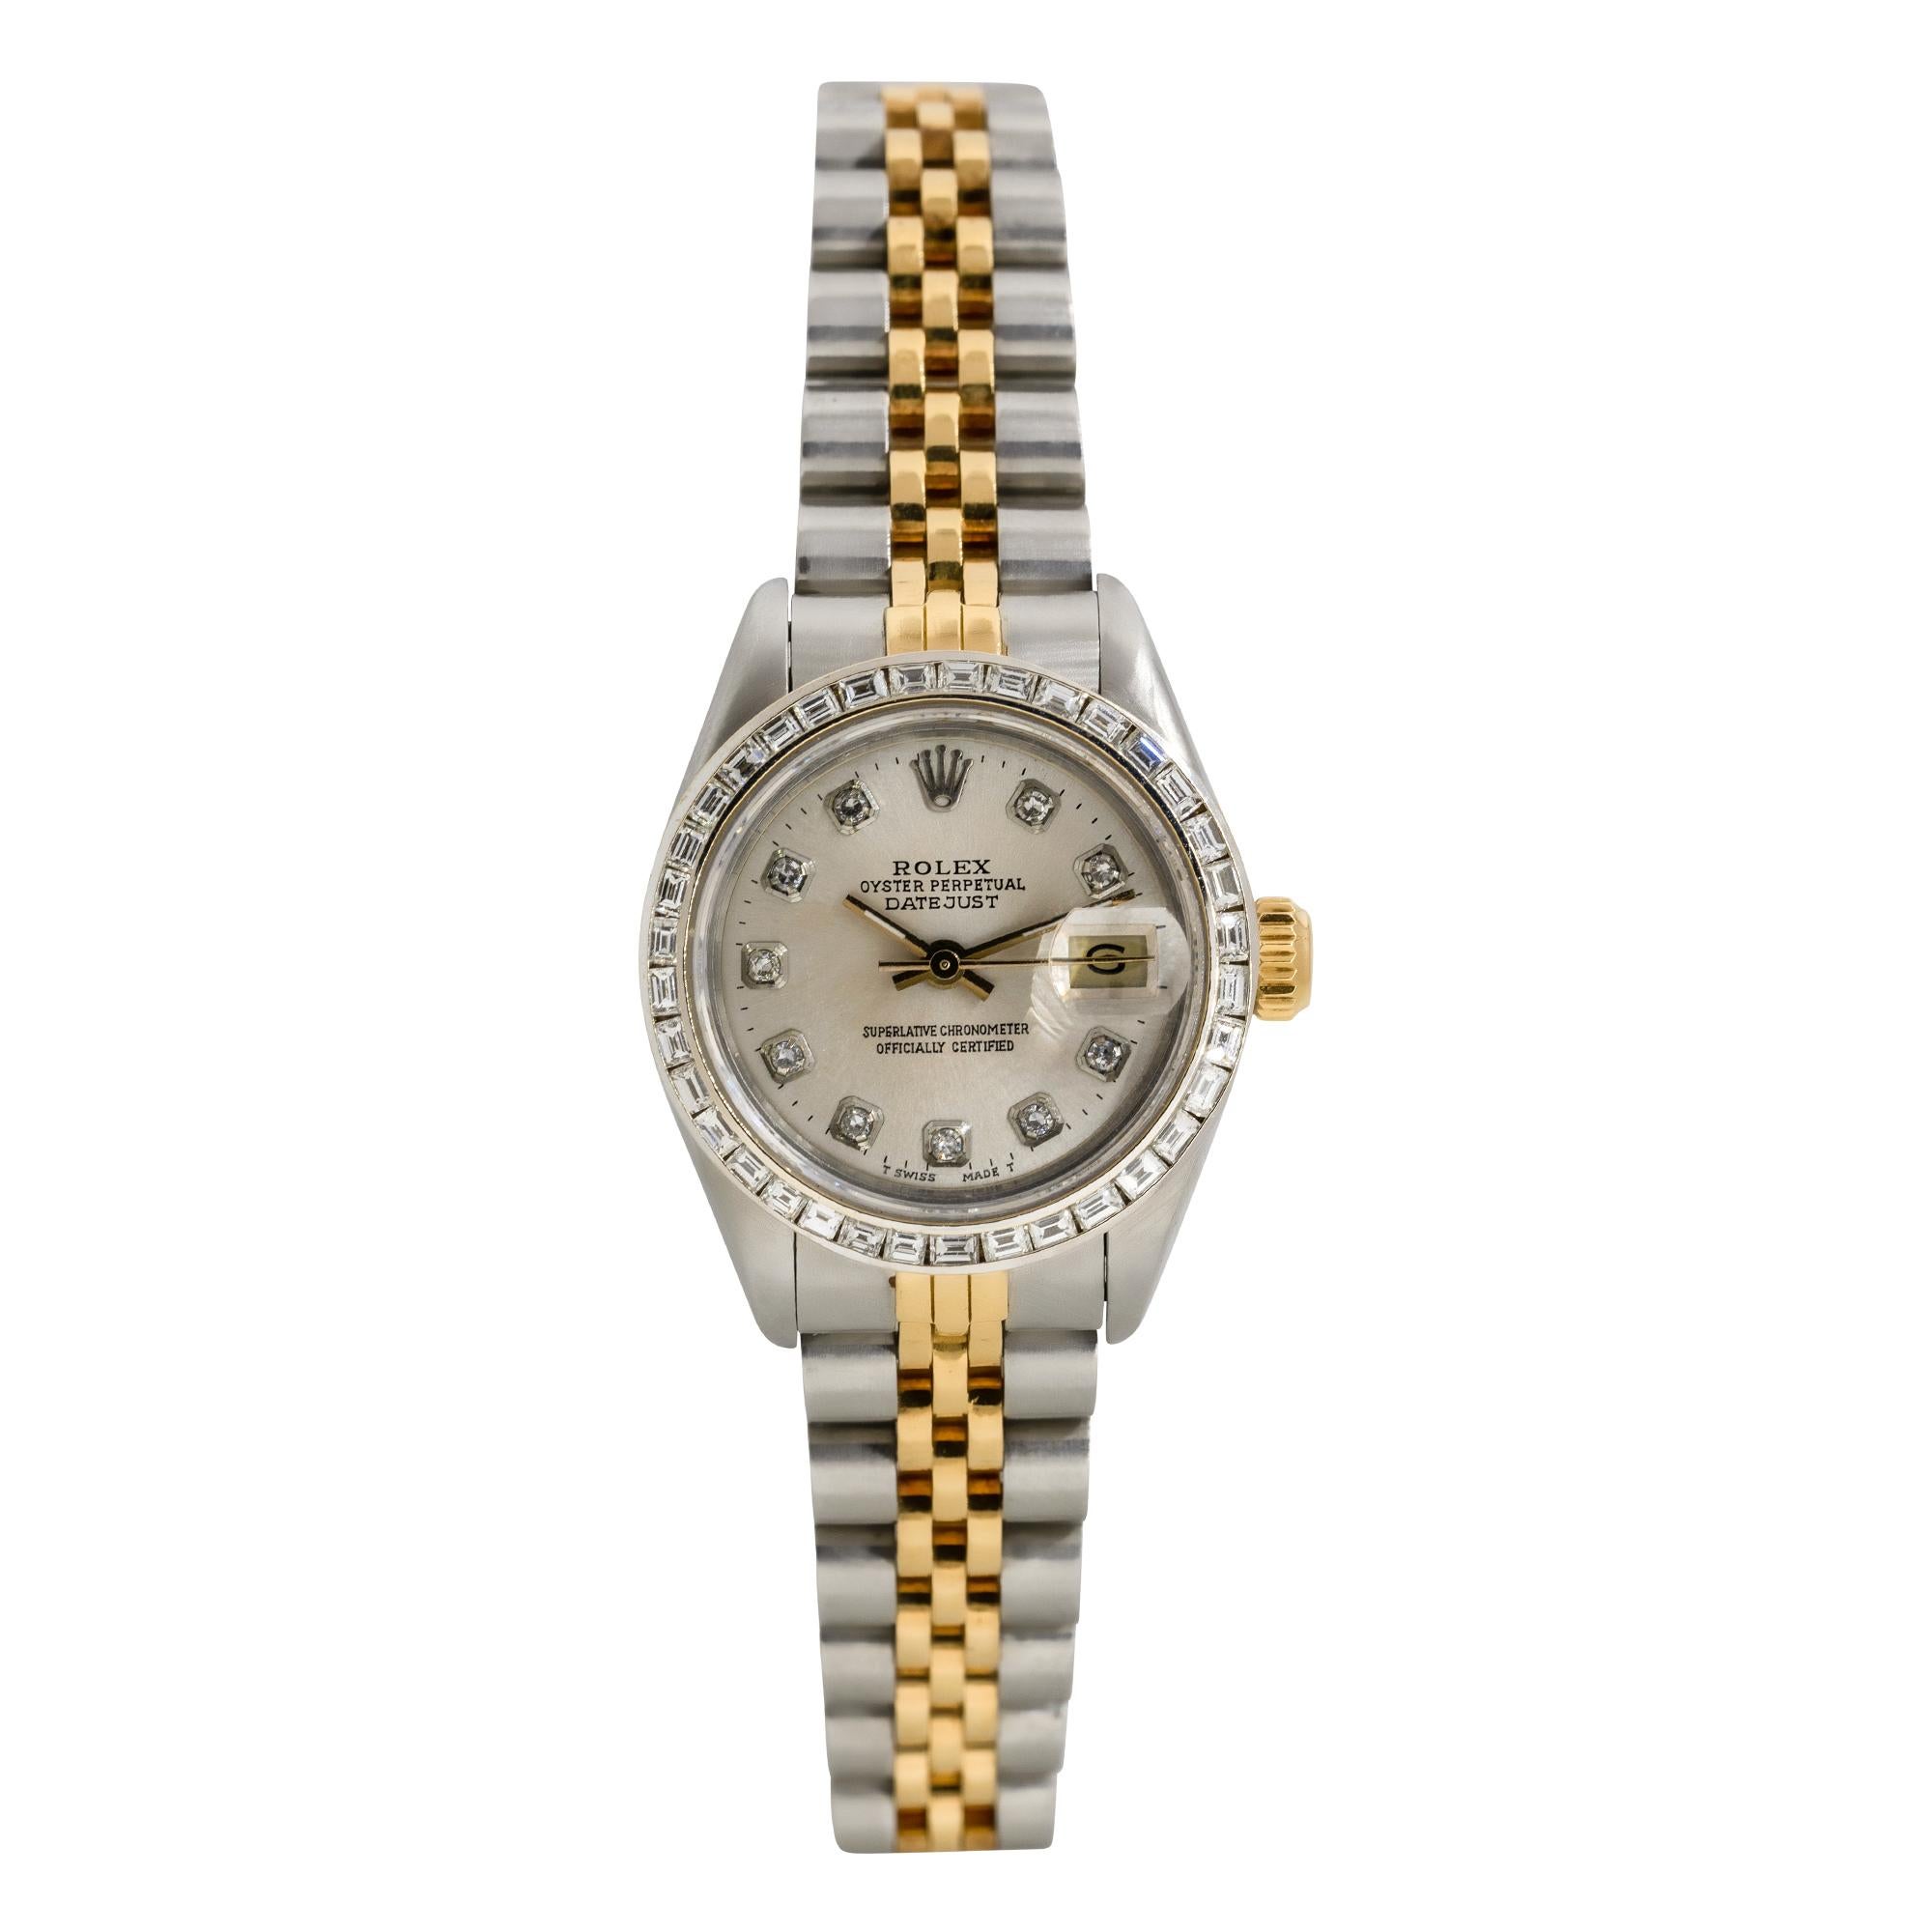 Brand: Rolex
MPN: 69173
Model: Datejust
Case Material: Stainless steel
Case Diameter: 26mm
Crystal: Sapphire Crystal
Bezel: Aftermarket 18k white gold bezel with baguette cut Diamonds
Dial: Aftermarket silver dial with Diamond hour markers. Date can